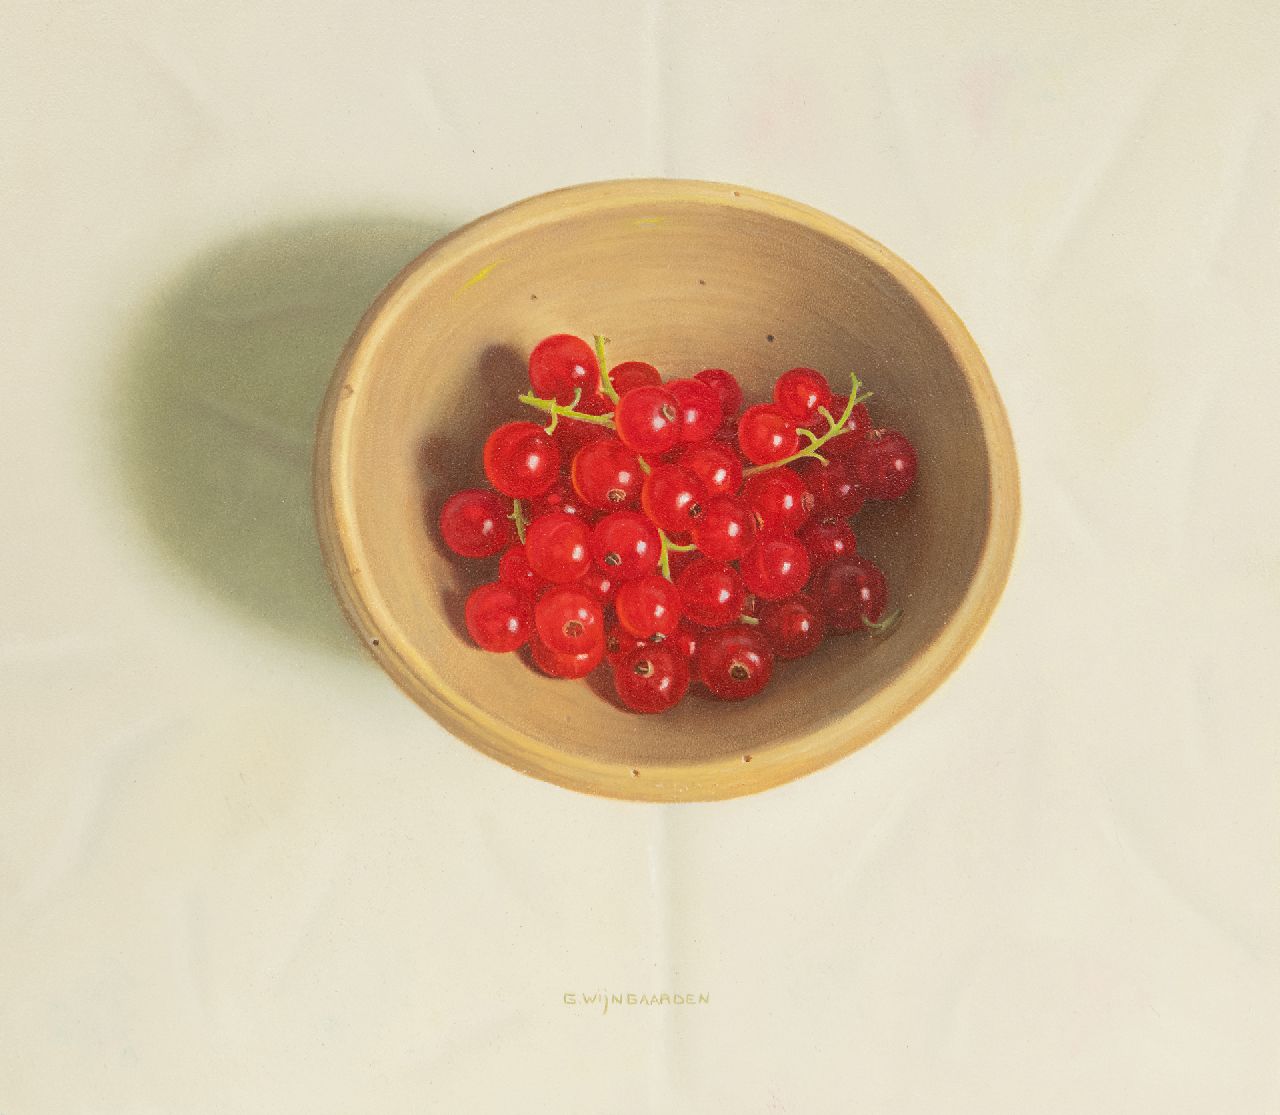 Gerrit Wijngaarden | Currants in a bowl, oil on board, 19.5 x 22.4 cm, signed l.c.